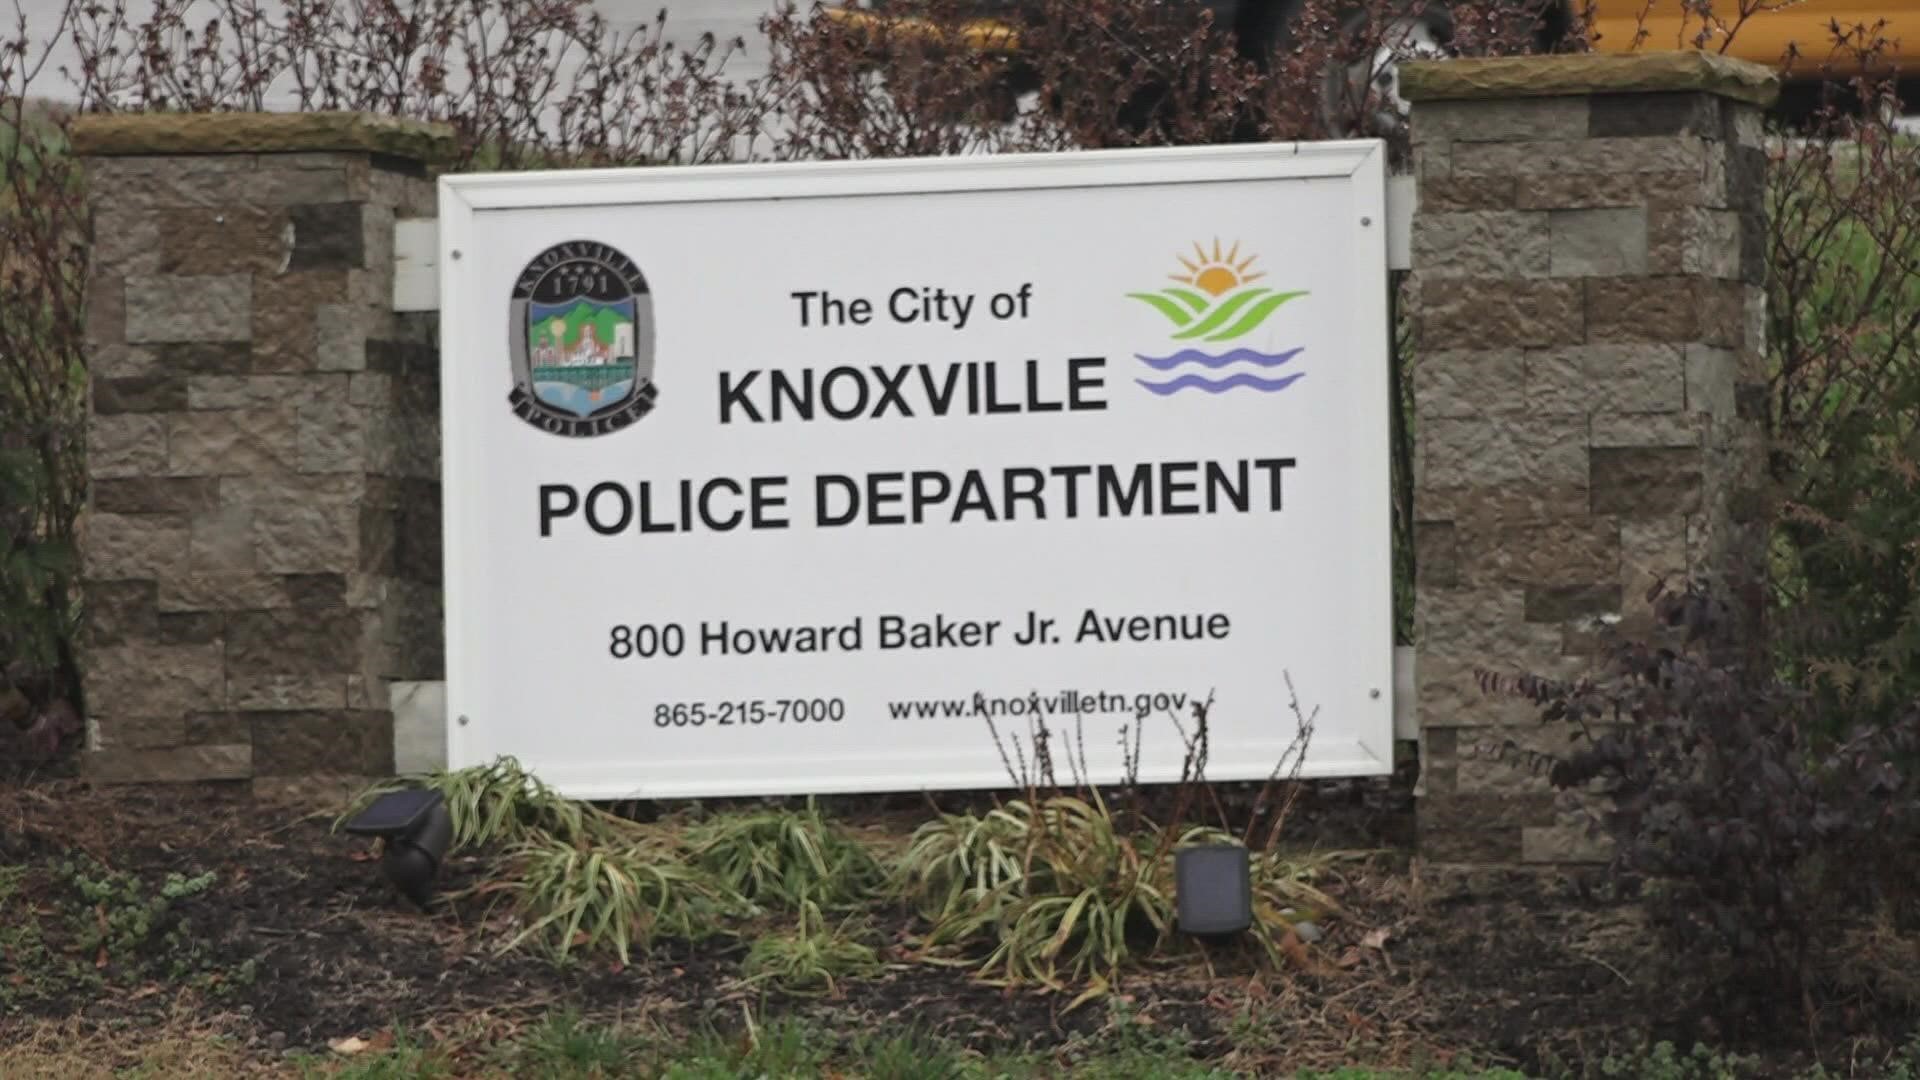 The Knoxville Police Department said they are hoping to build up their ranks ahead of the holidays.